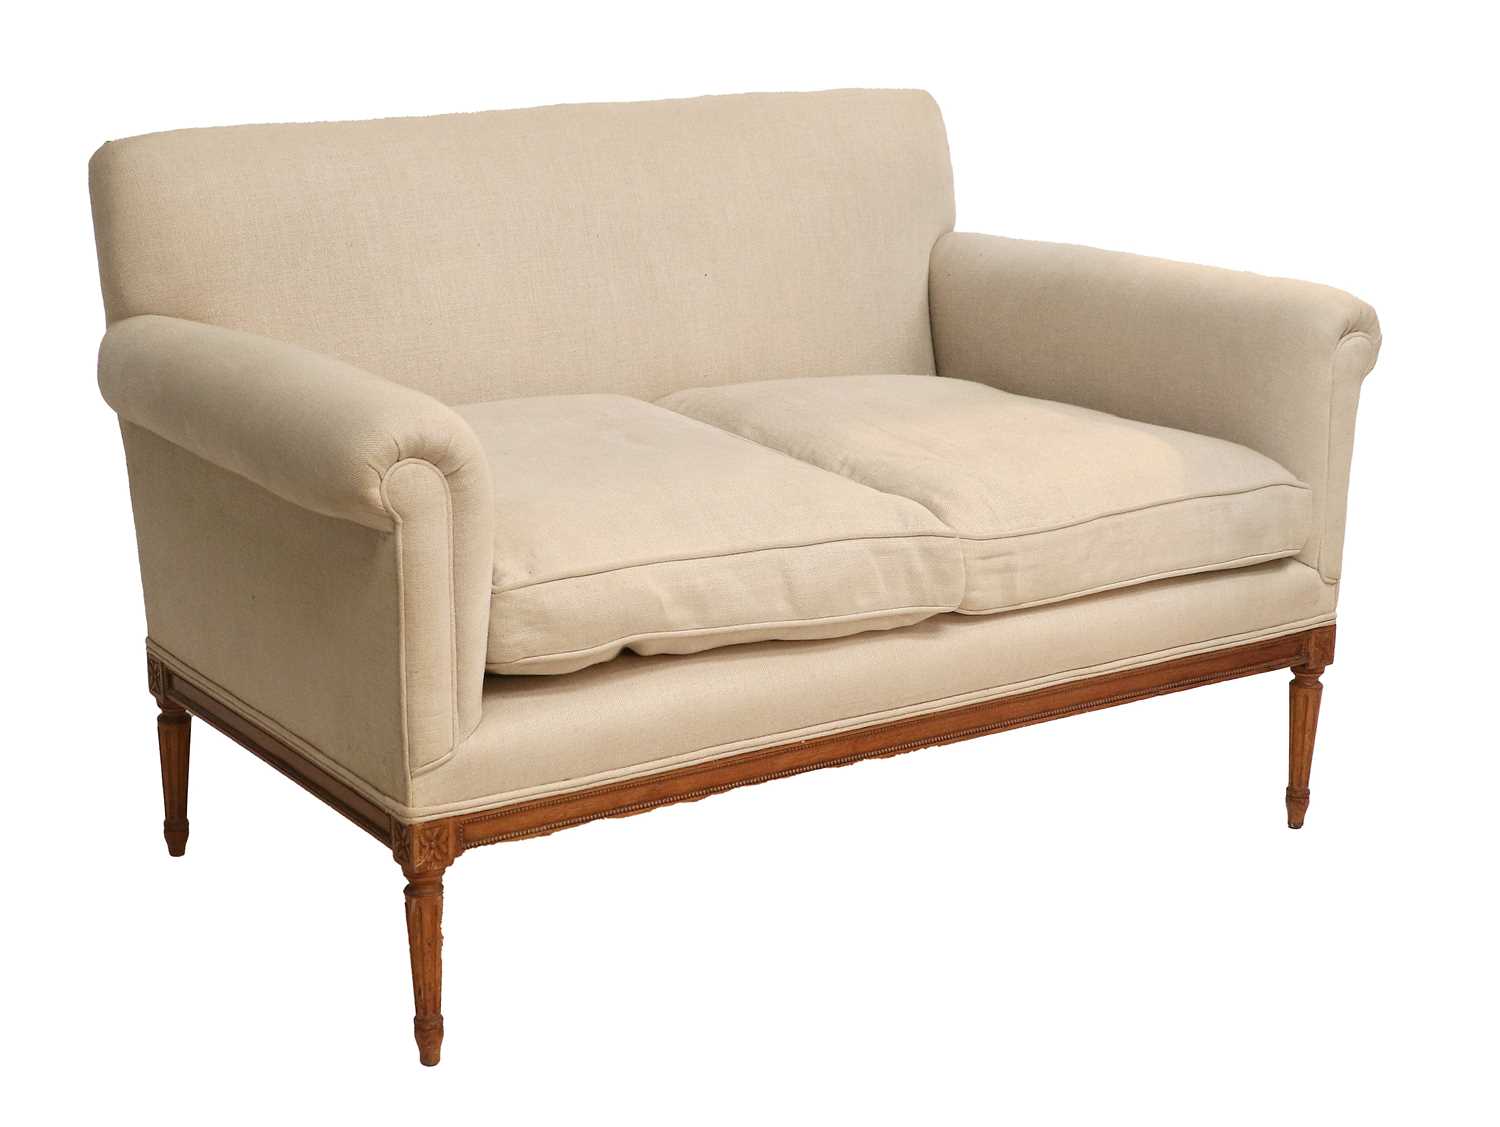 A Late 19th Century French Beech or Walnut Framed Two-Seater Sofa, late 19th century, recovered in